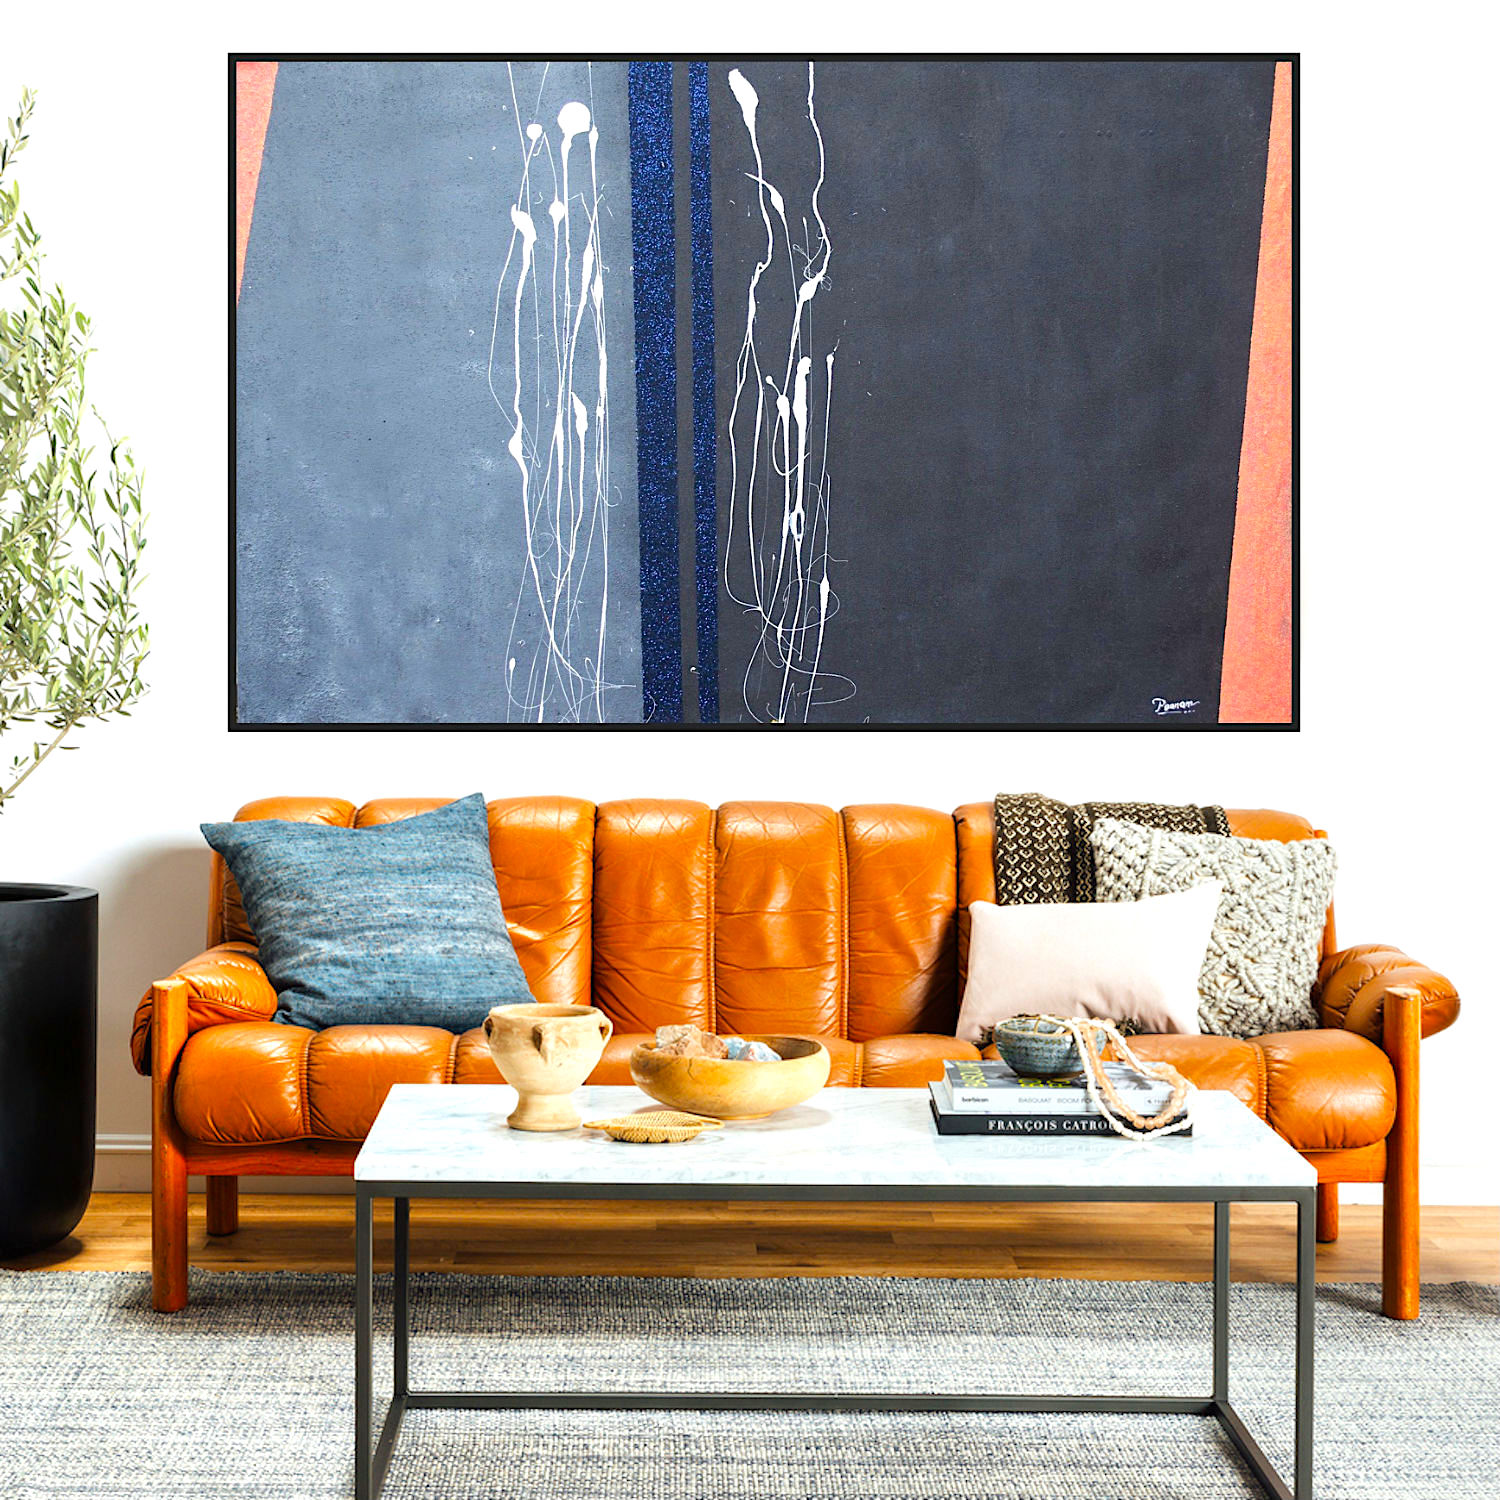 How to curate and display art for your home